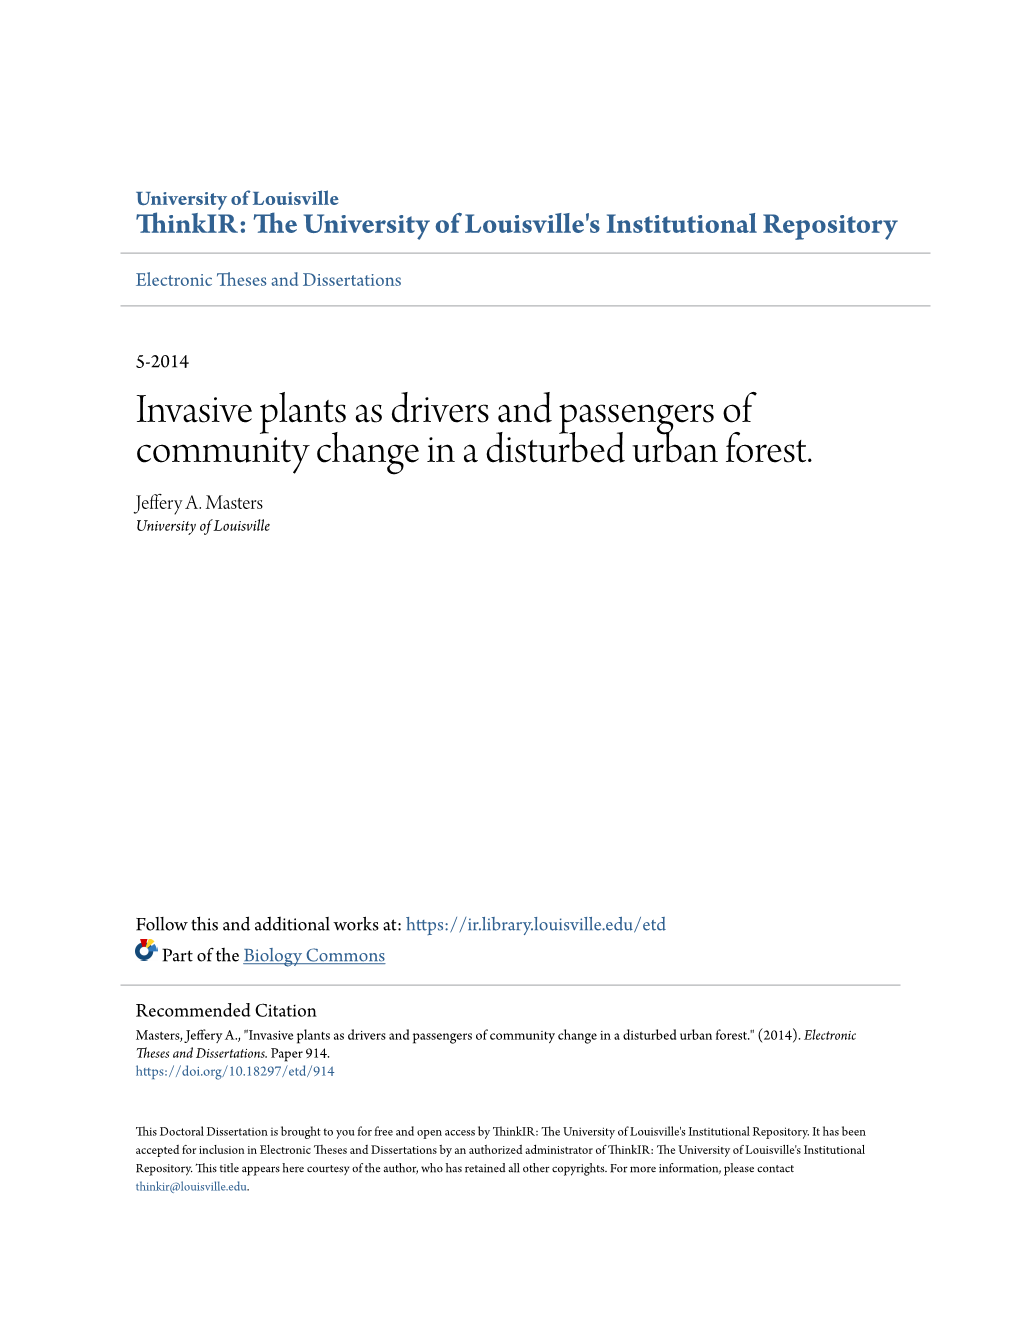 Invasive Plants As Drivers and Passengers of Community Change in a Disturbed Urban Forest